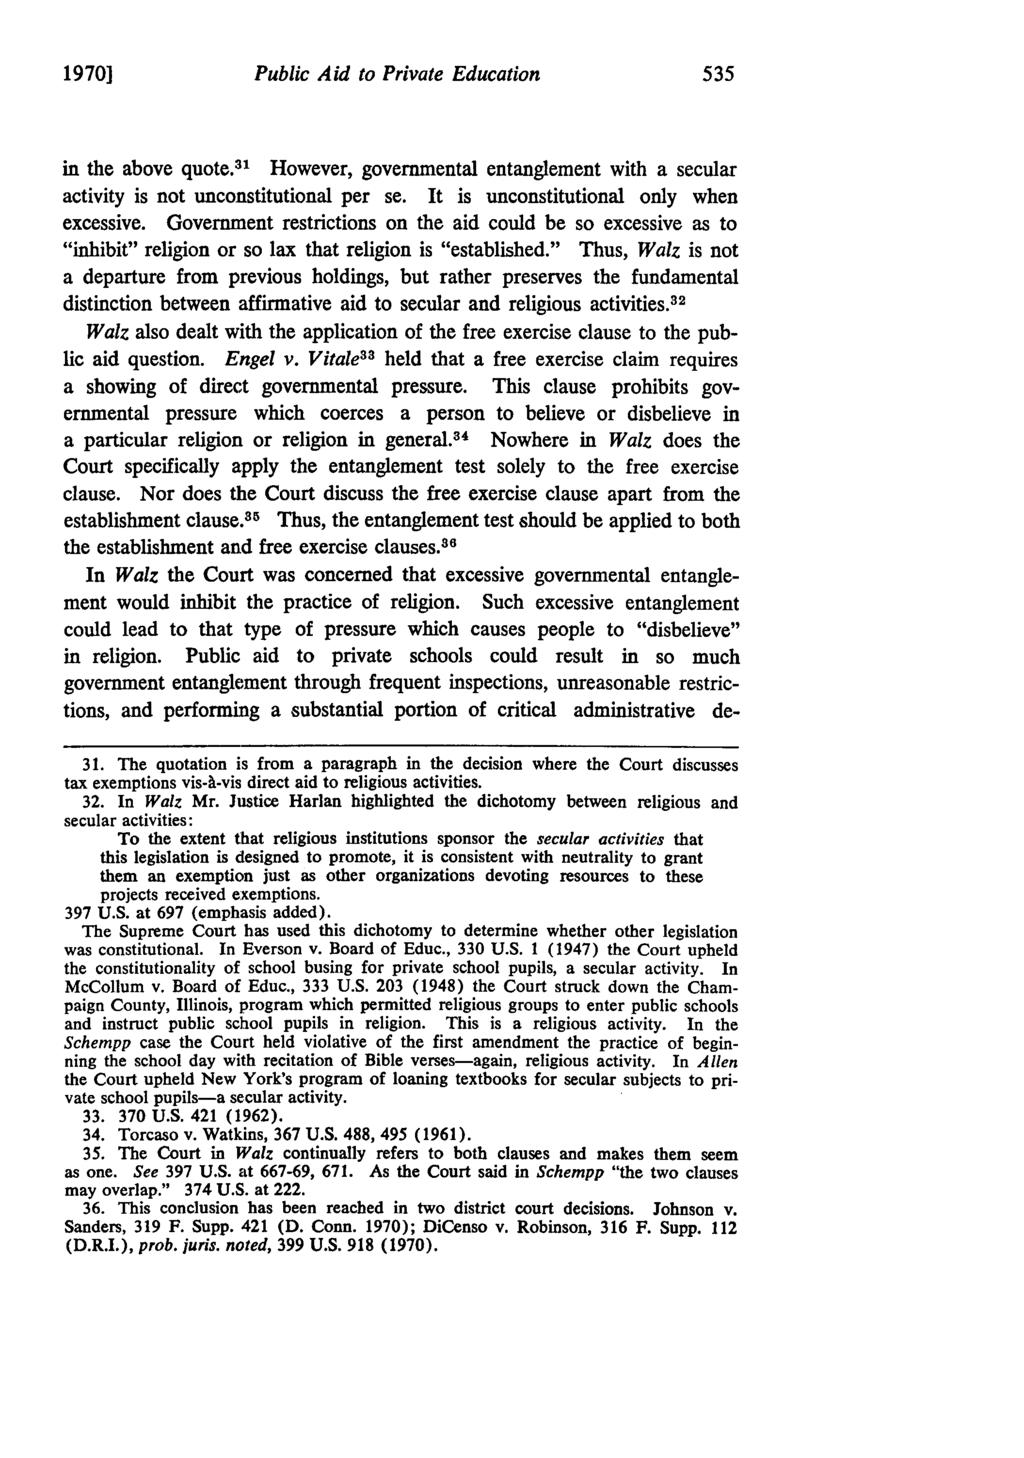 1970] Public Aid to Private Education in the above quote. 31 However, governmental entanglement with a secular activity is not unconstitutional per se. It is unconstitutional only when excessive.